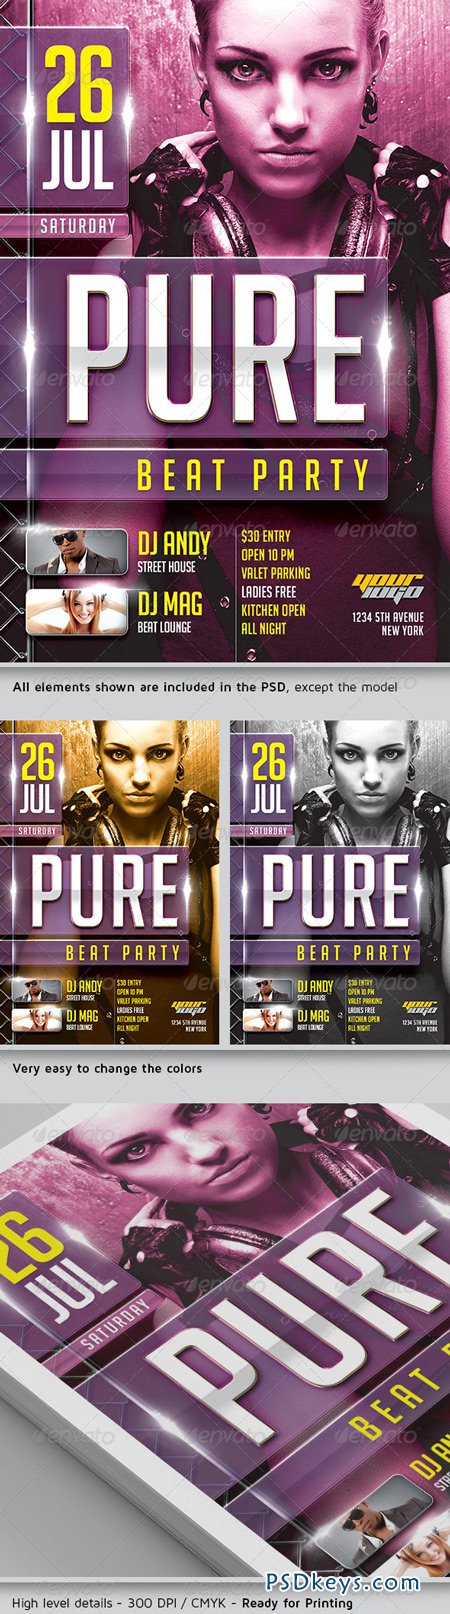 Pure Beat Flyer Template 4963087